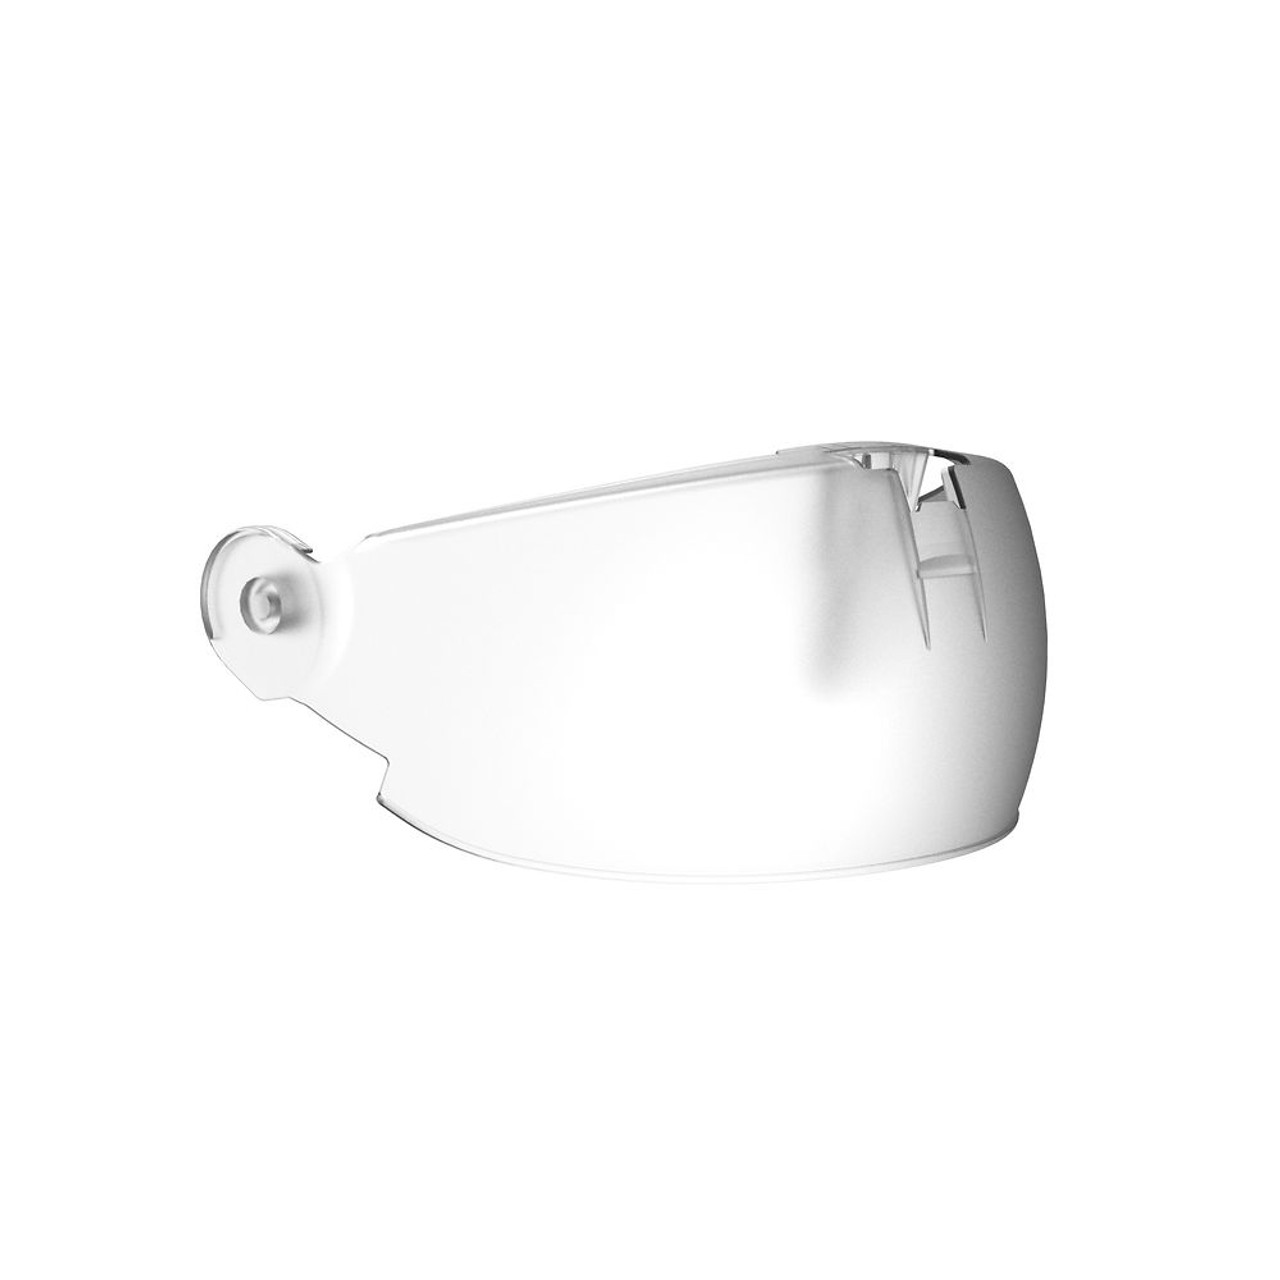 ZEKLER Eye Protection ZONE Helmet with  for ZEKLER Eye Protection| ZONE Helmet Visor Cover Eye Protection that have  available in Australia and New Zealand